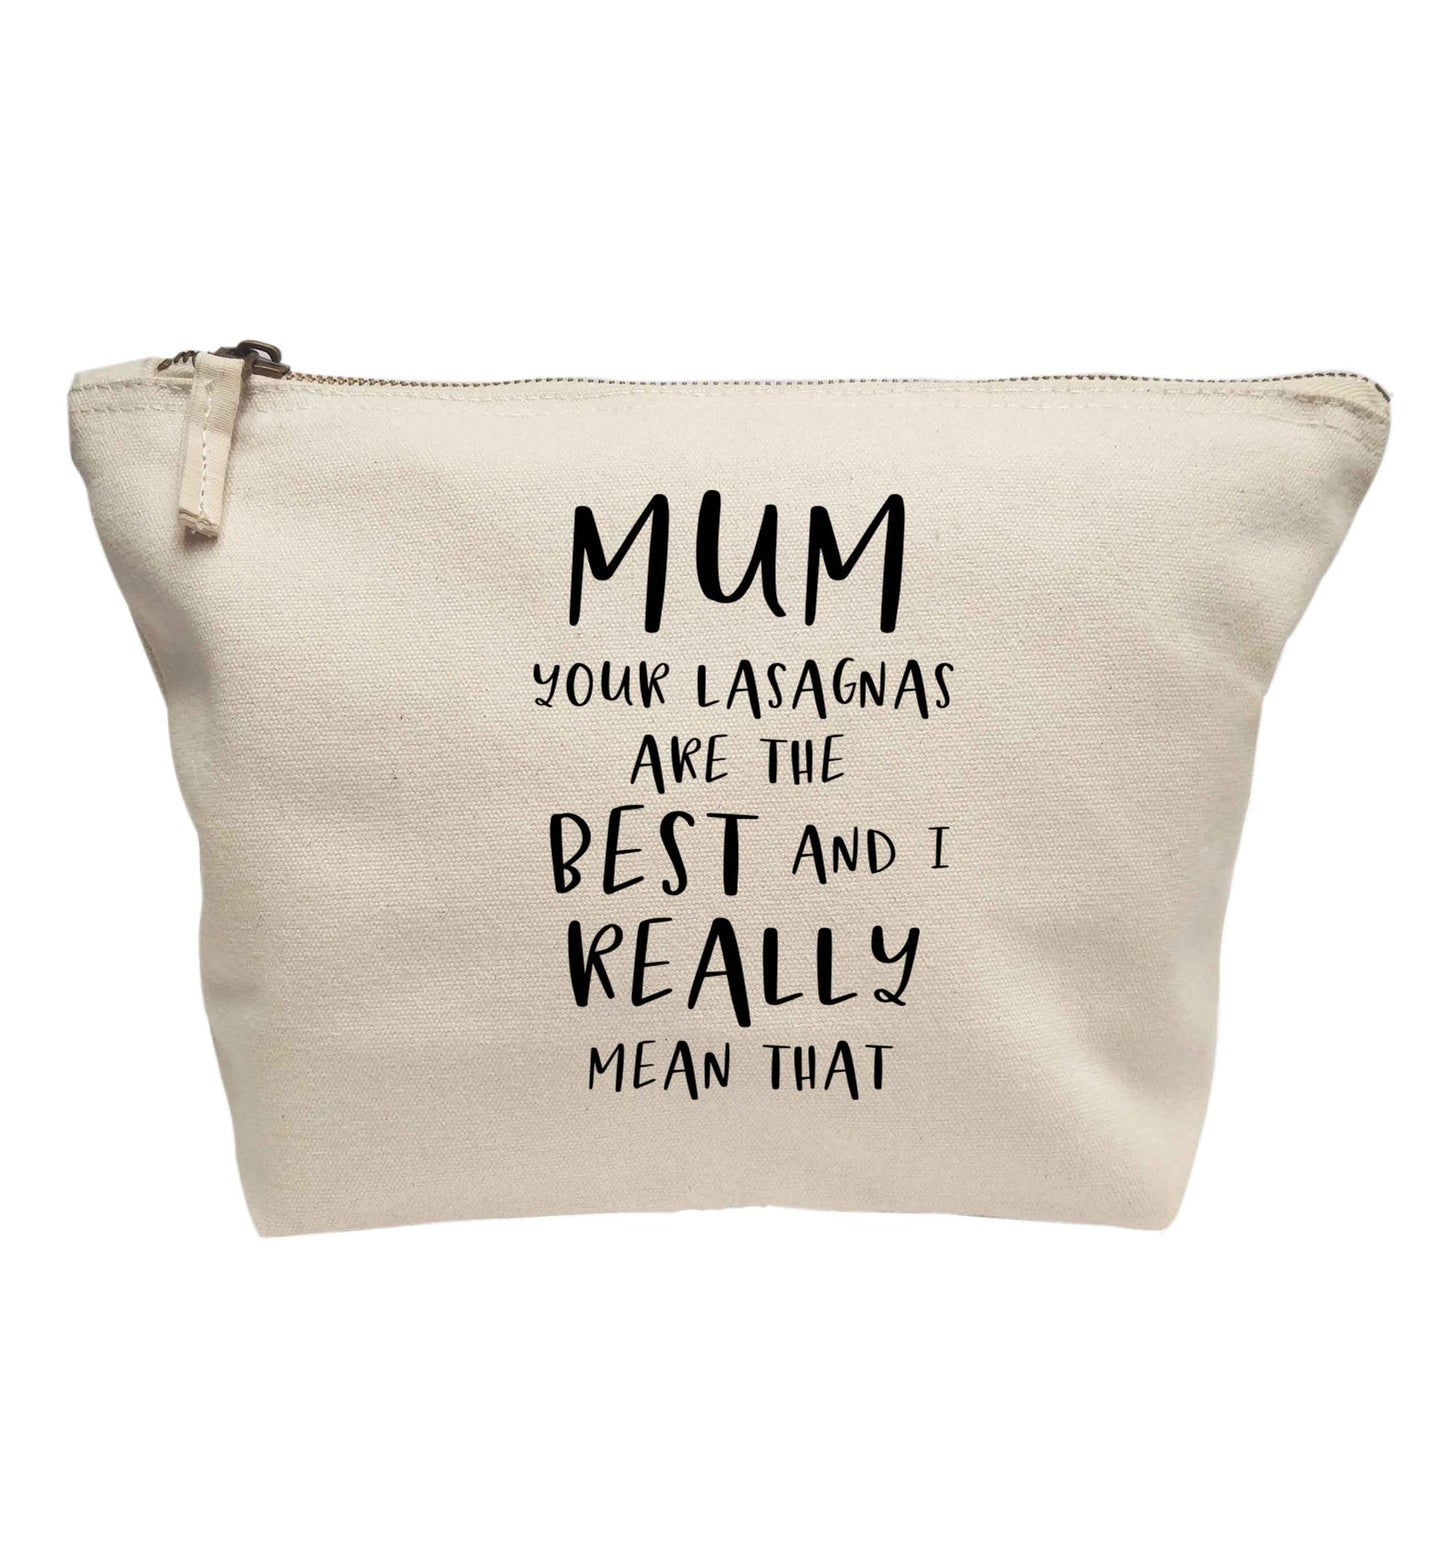 Mum your lasagnas are the best and I really mean that | Makeup / wash bag